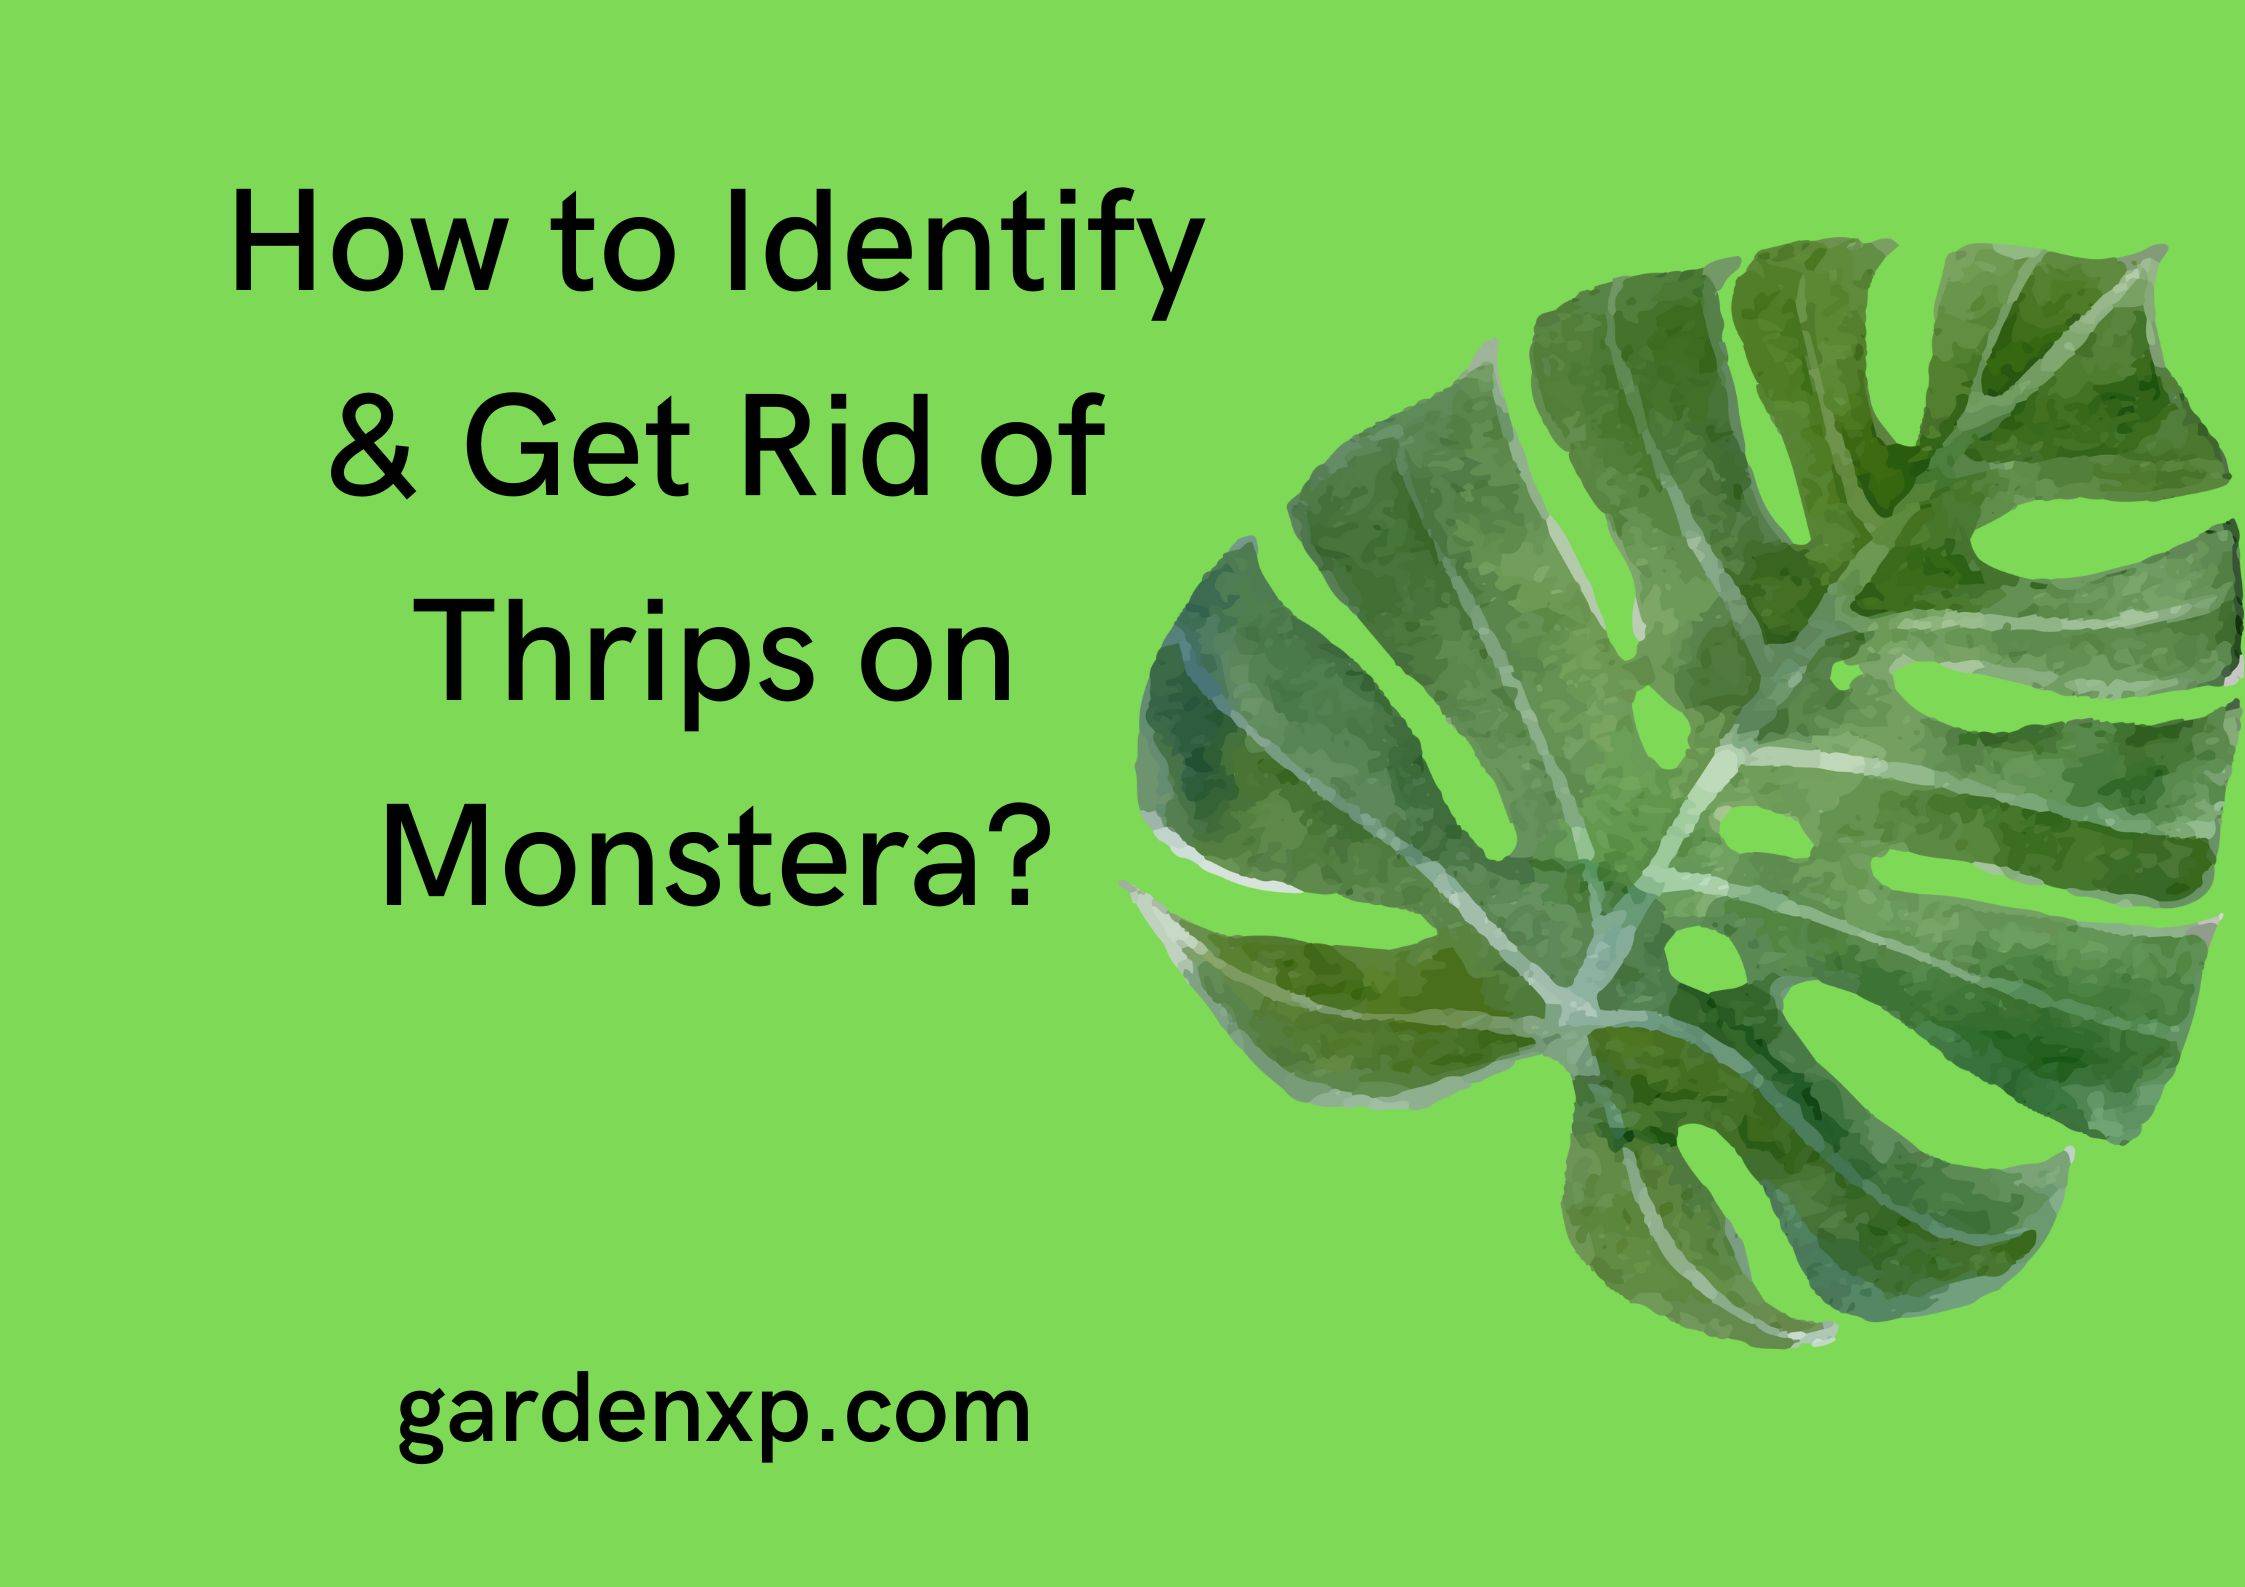 How to Identify and Get Rid of Thrips on Monstera?